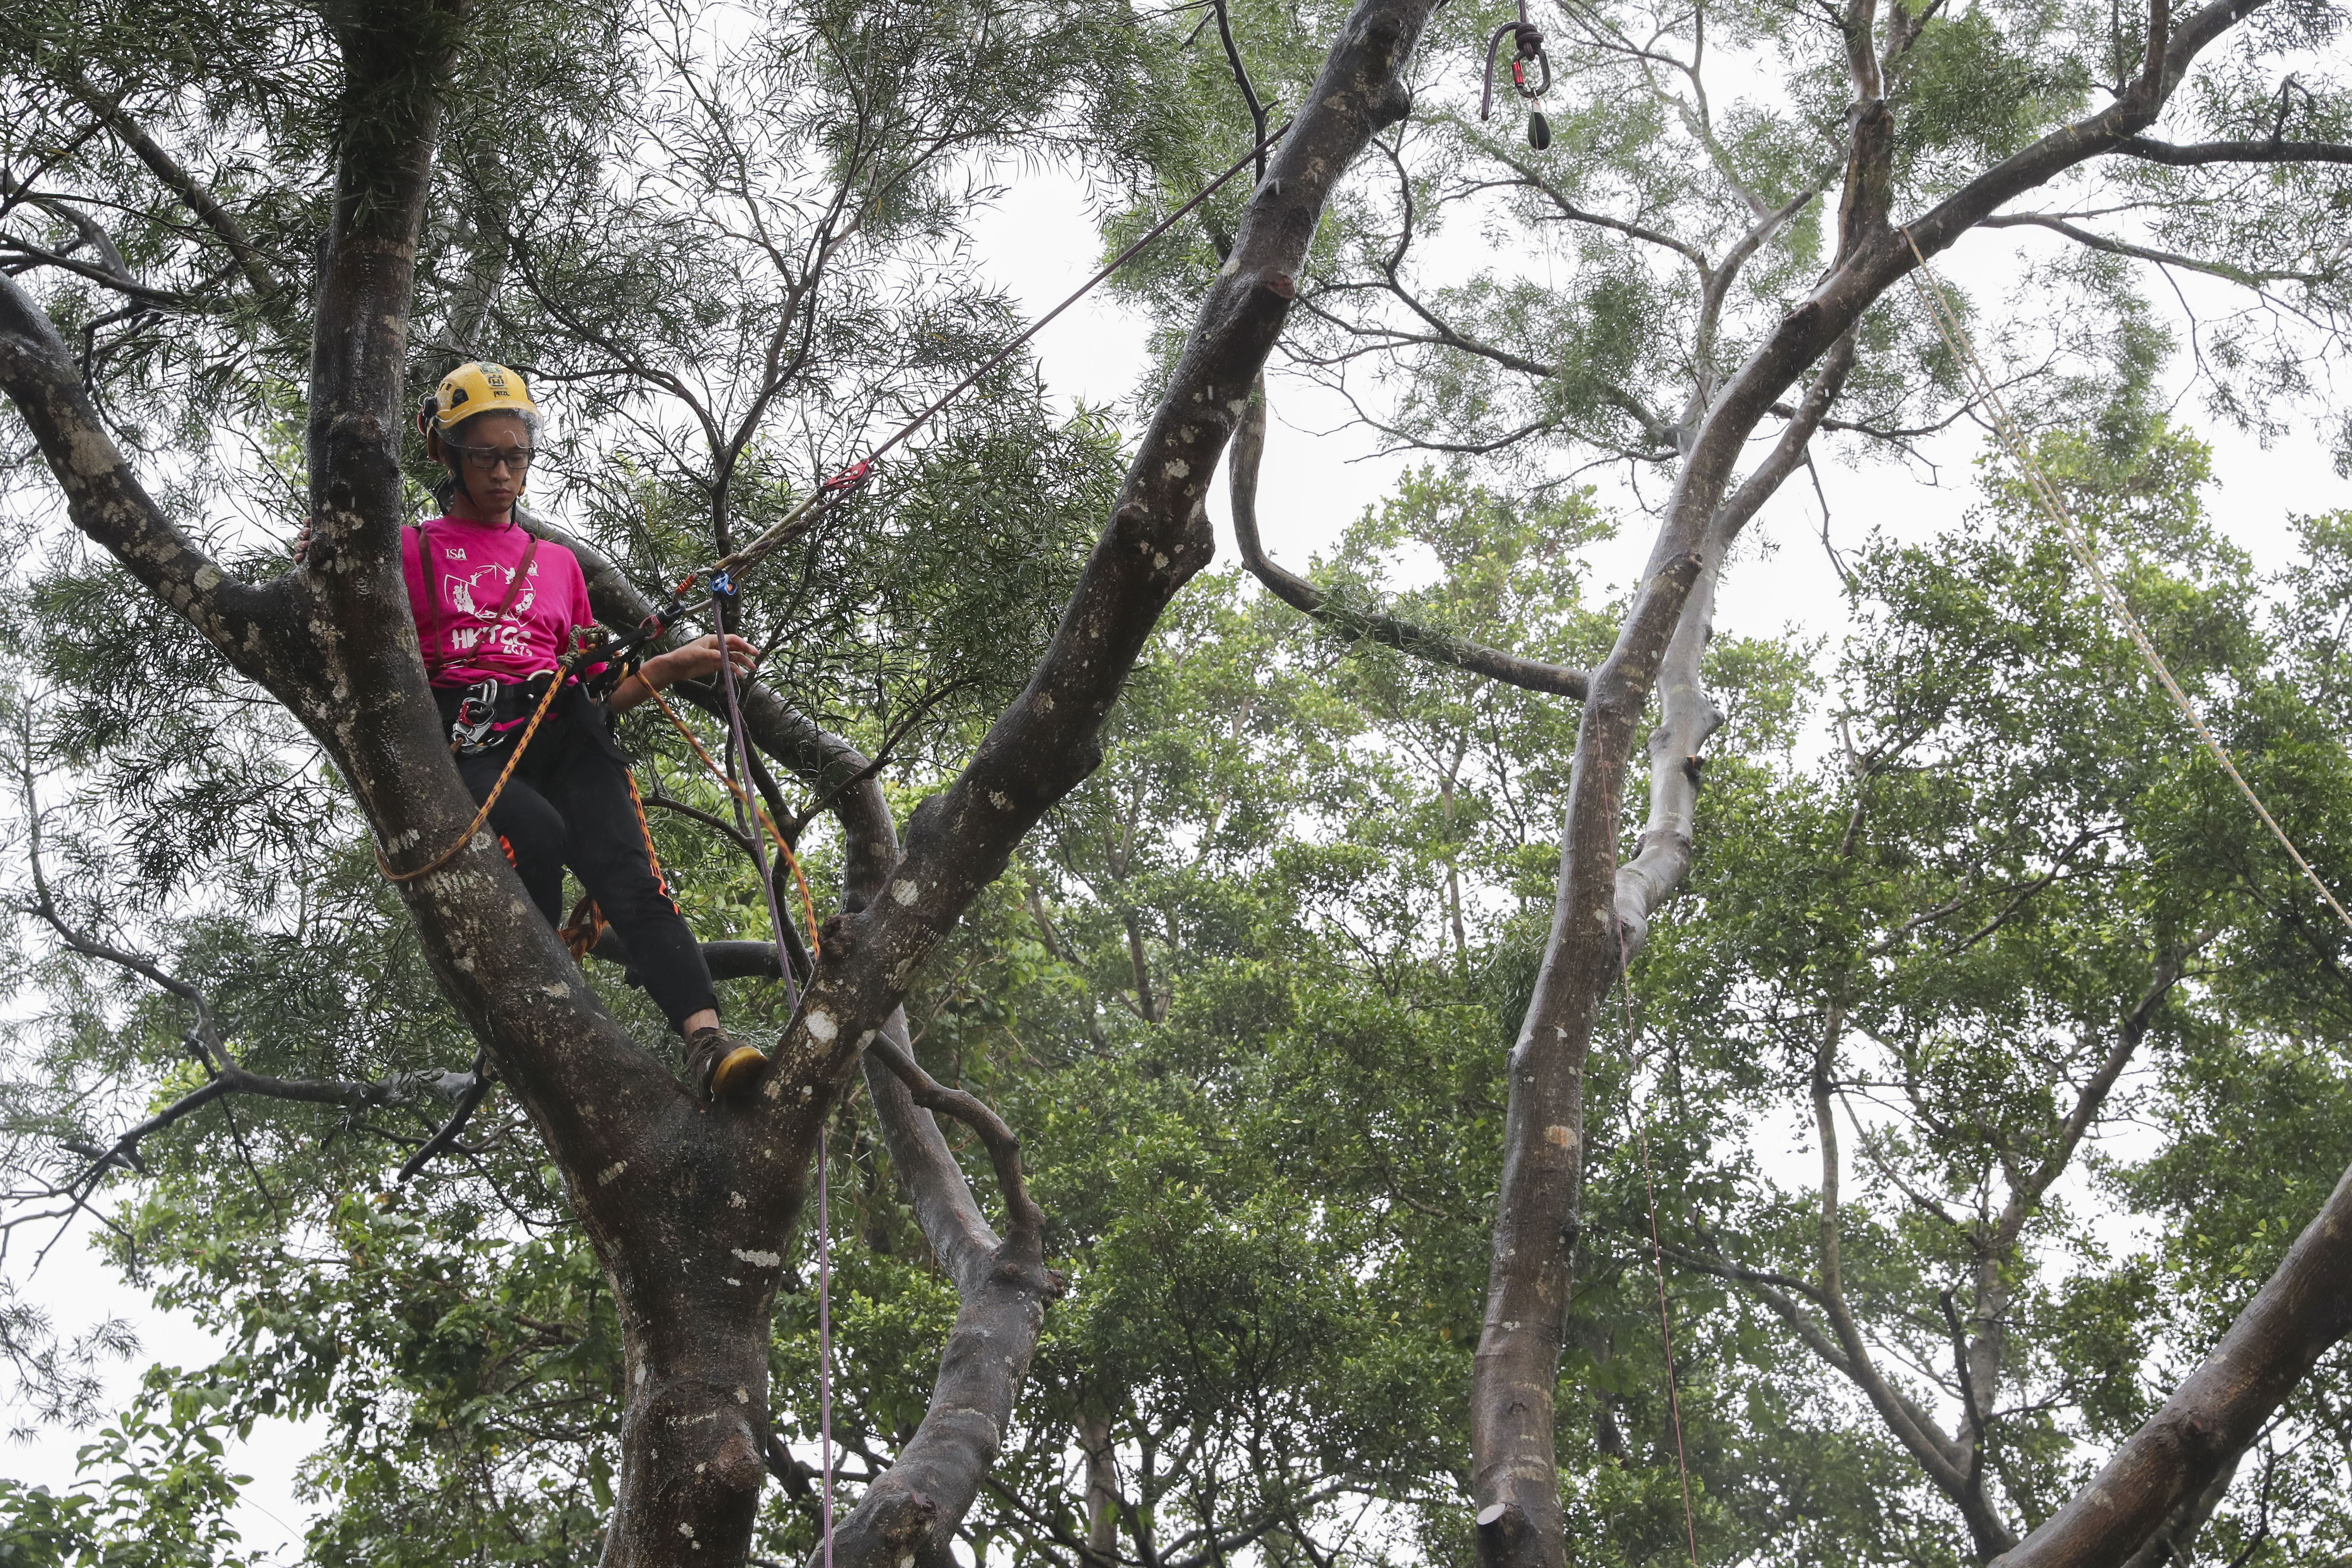 The tree-climbing event was held over two days at Shing Mun Country Park in the New Territories. Photo: K. Y. Cheng